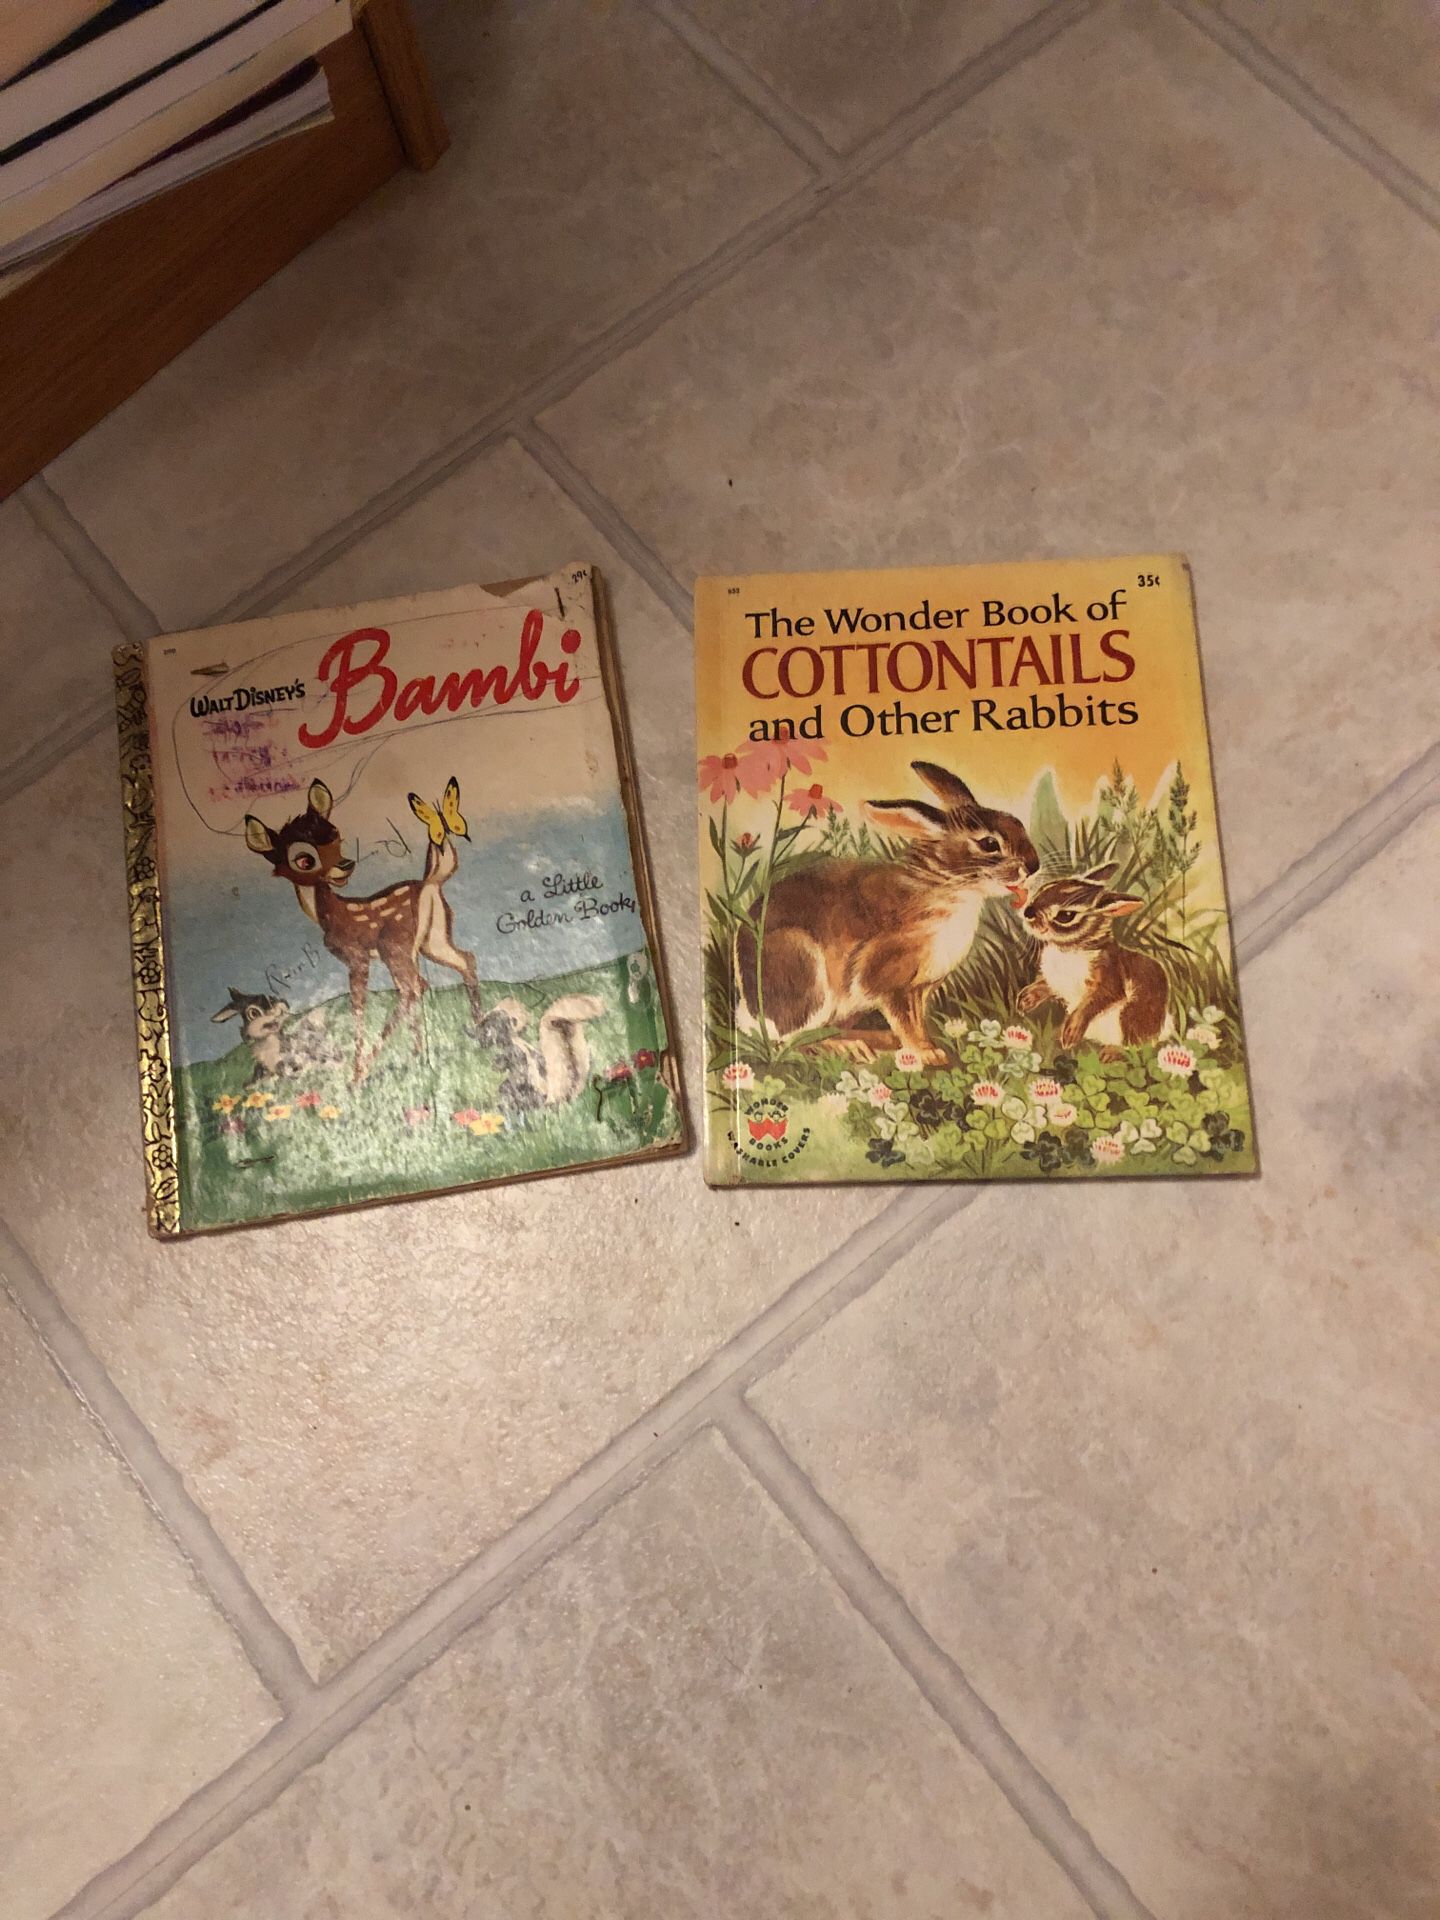 Golden book - “Bambi” and a WonderBook entitled “Cottontails and Other Rabbits”